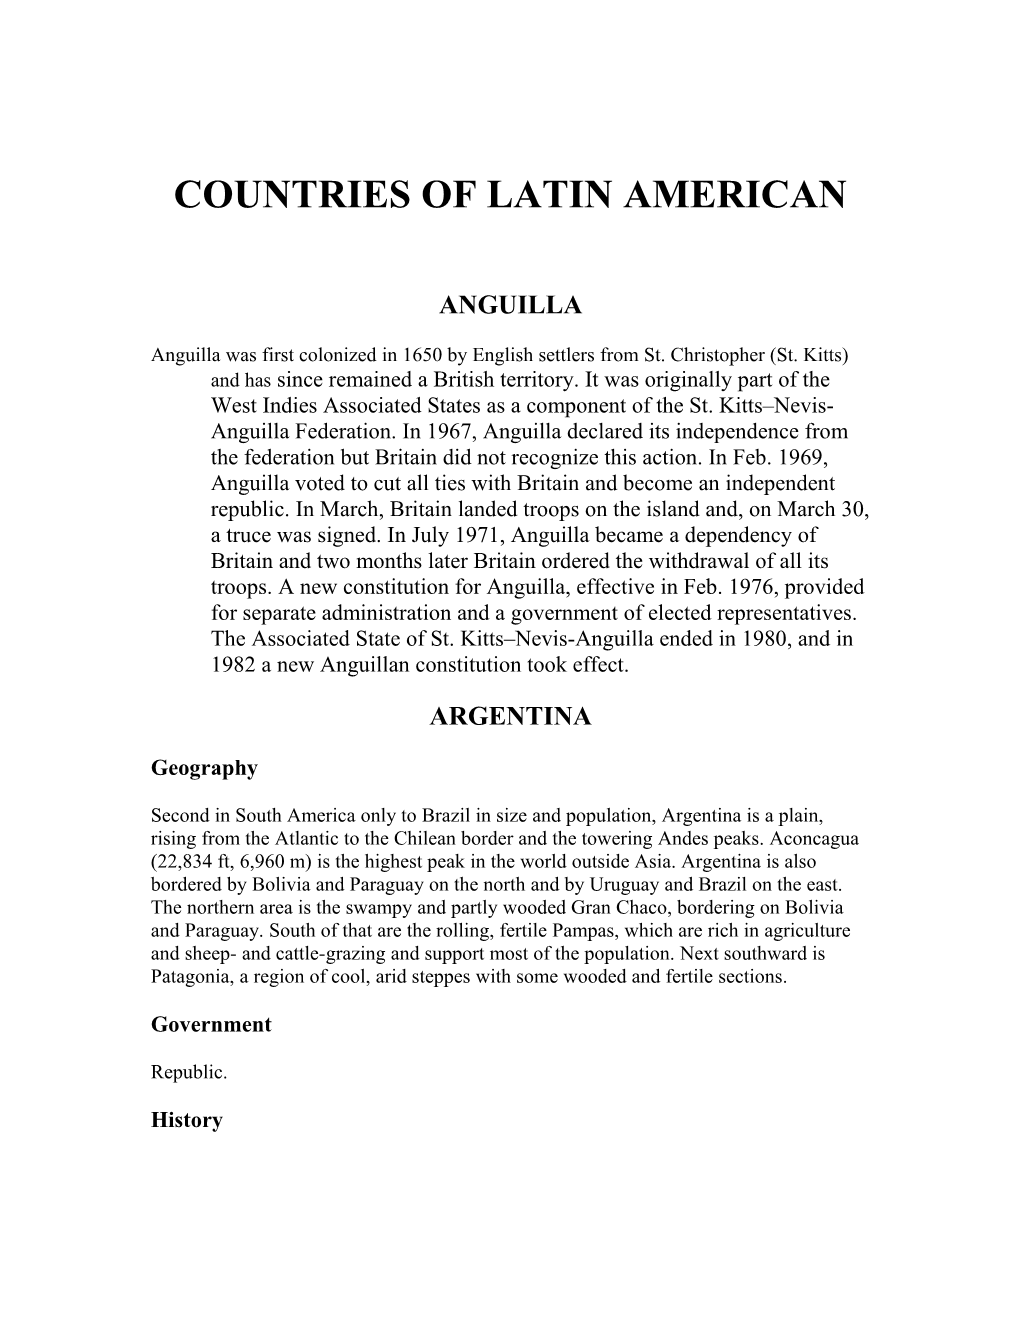 Countries of Latin American